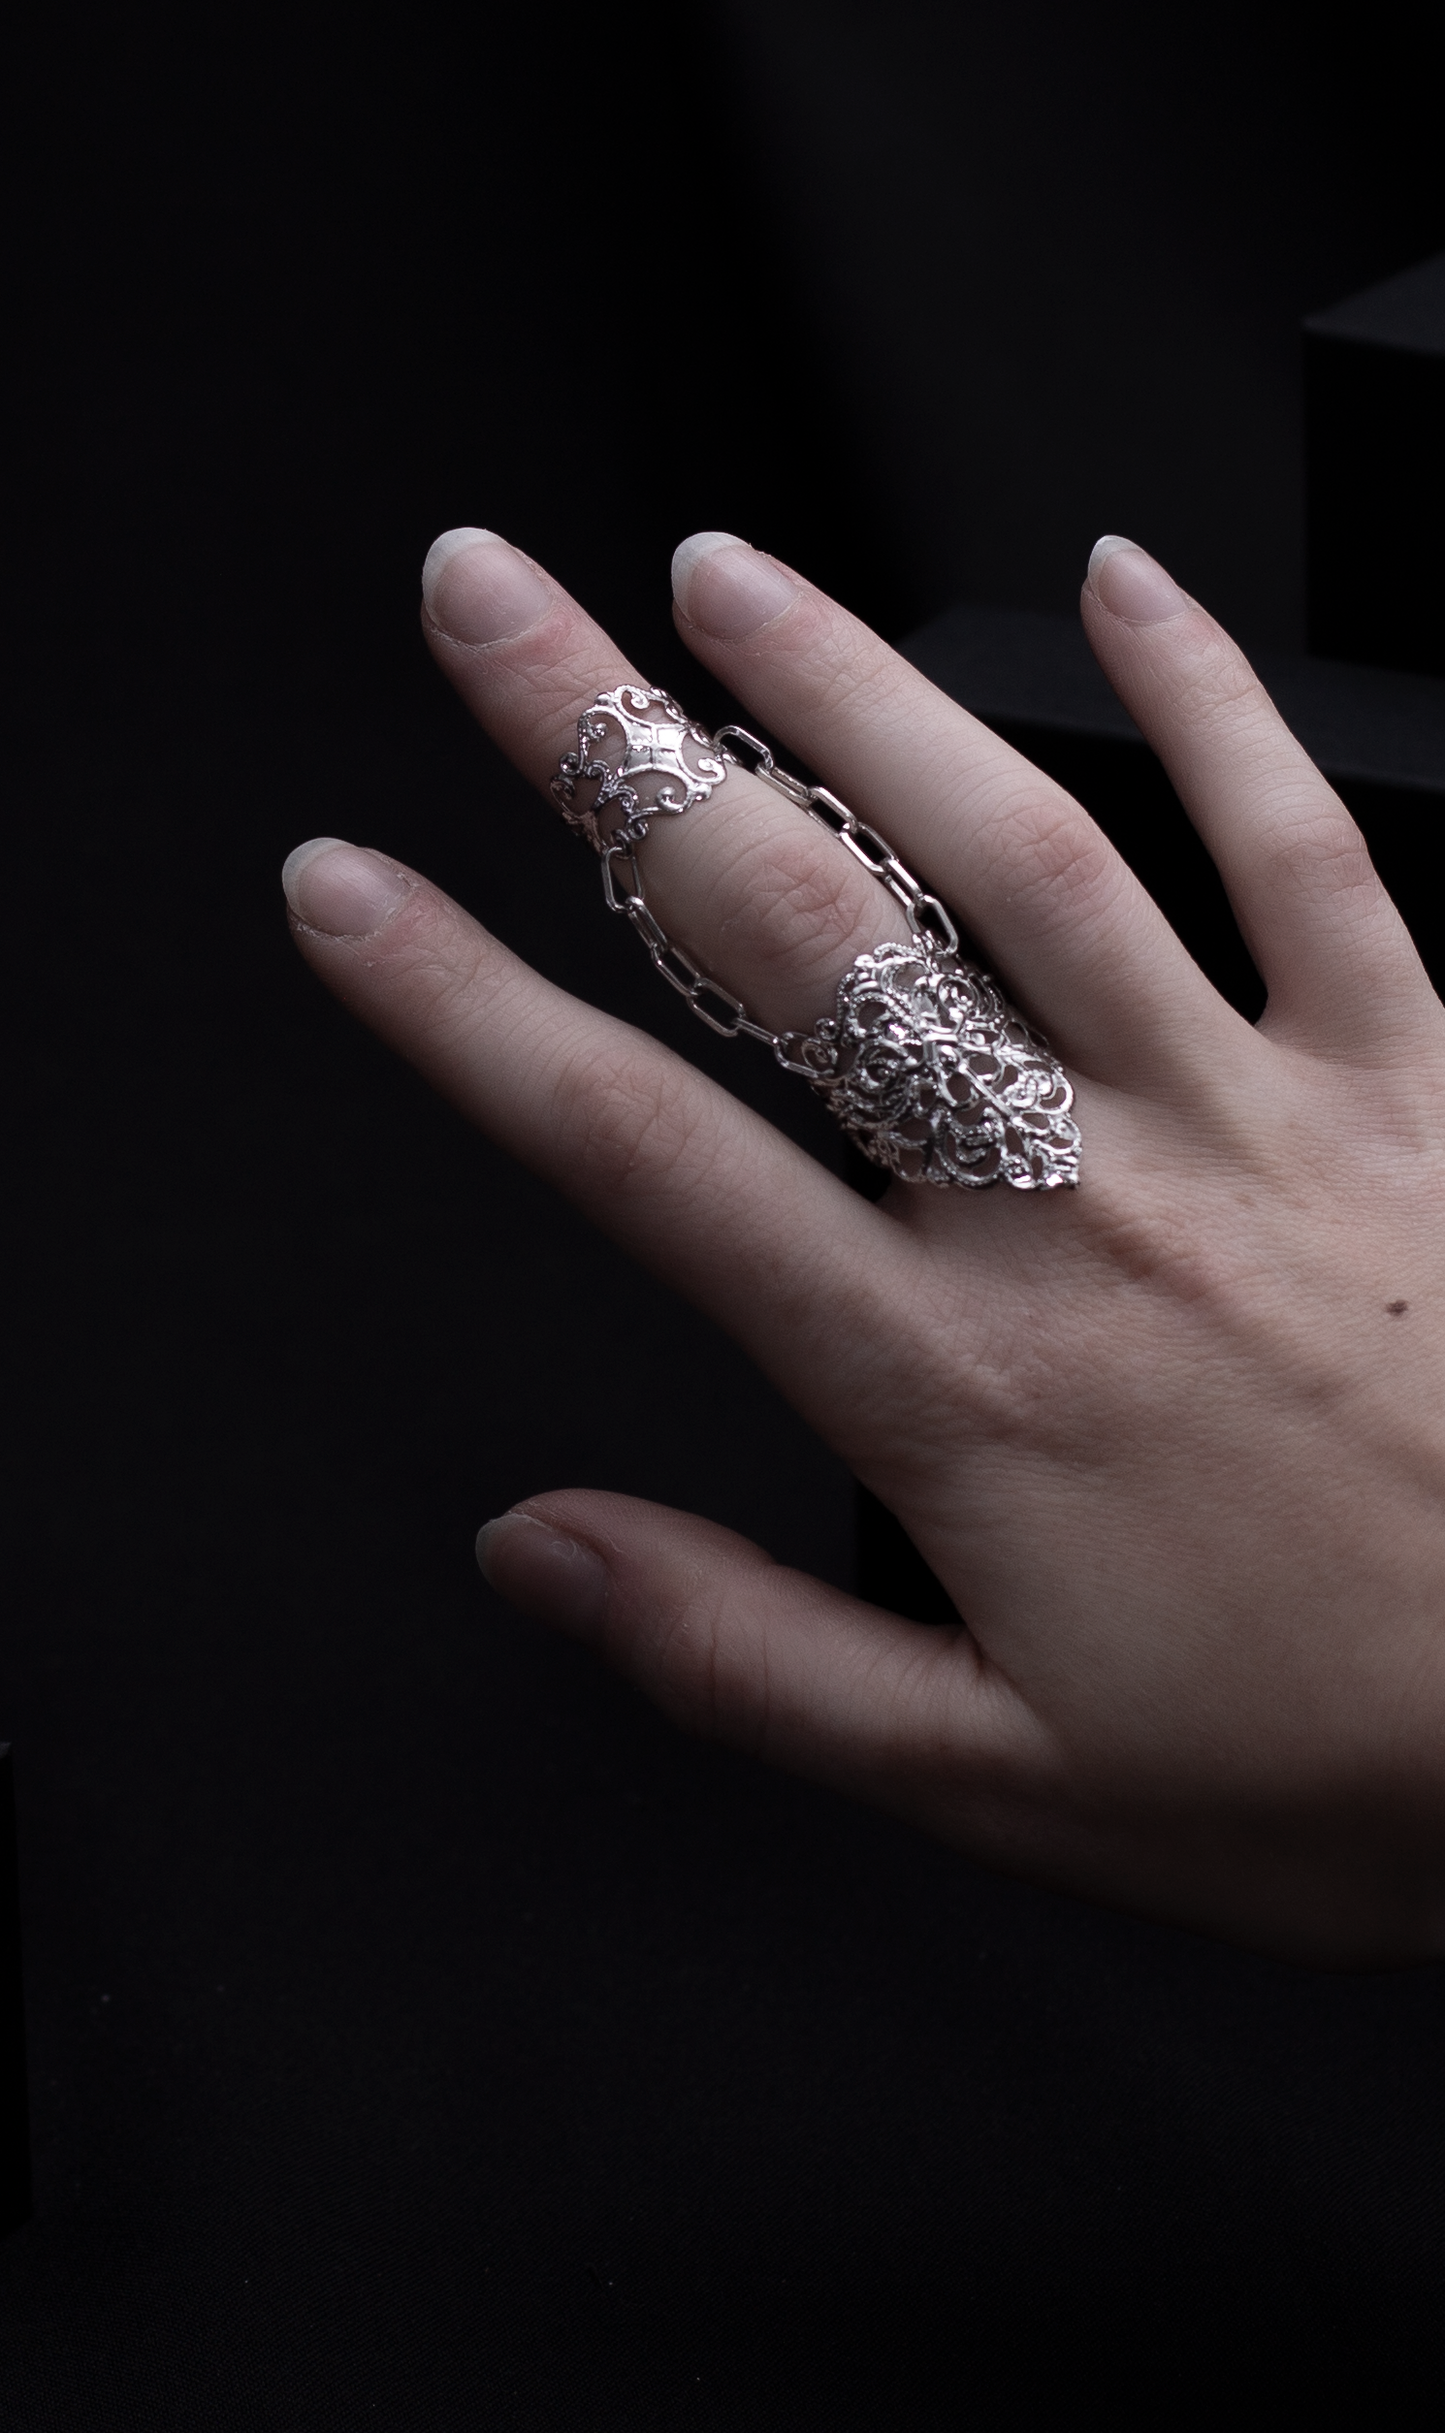 A hand showcases a Myril Jewels gothic double ring with elaborate detailing, embodying a dark, avant-garde style. This bold jewelry piece, perfect for minimal goth enthusiasts, can be a statement piece for festival wear or a unique goth girlfriend gift, infused with the essence of witchcore and whimsigoth trends.